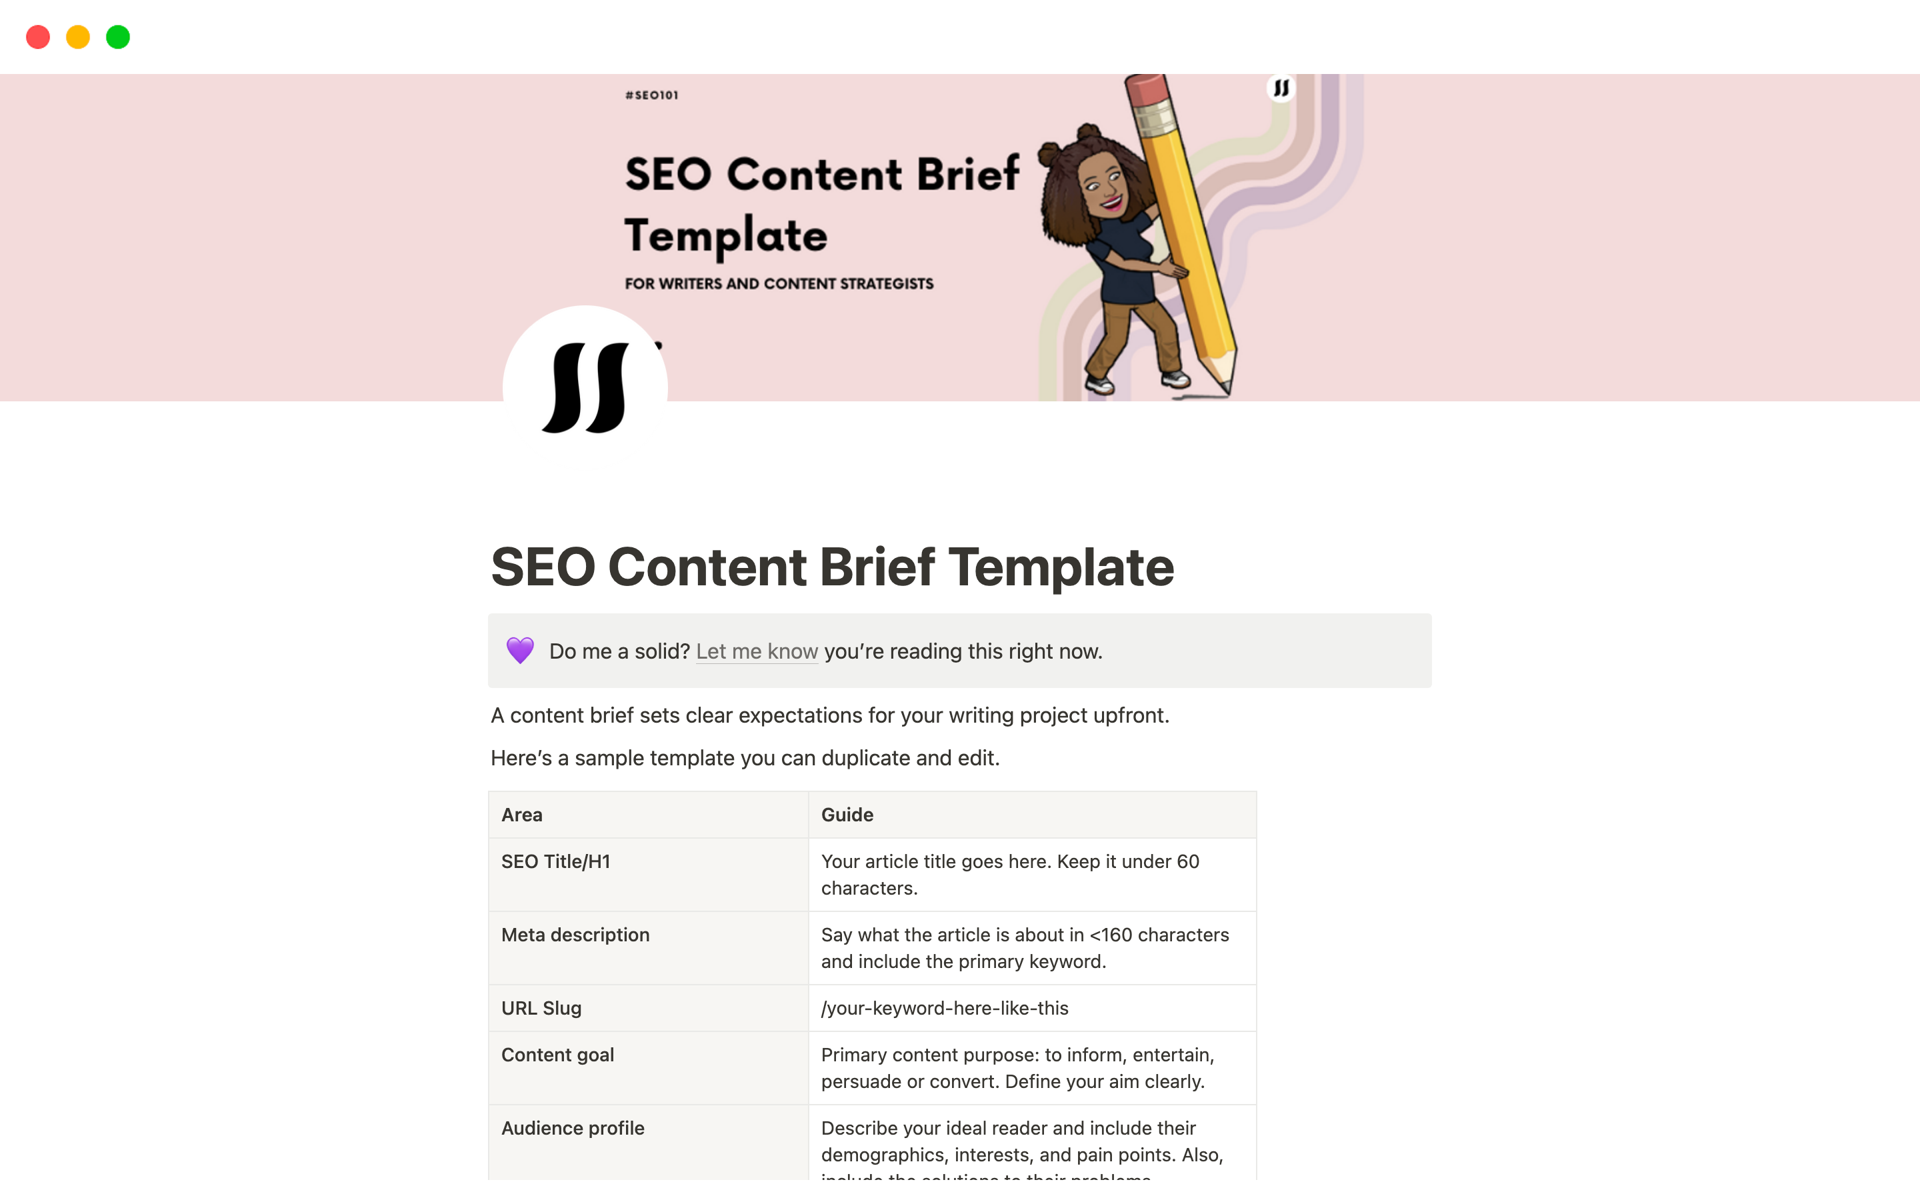 A template preview for SEO Content Brief